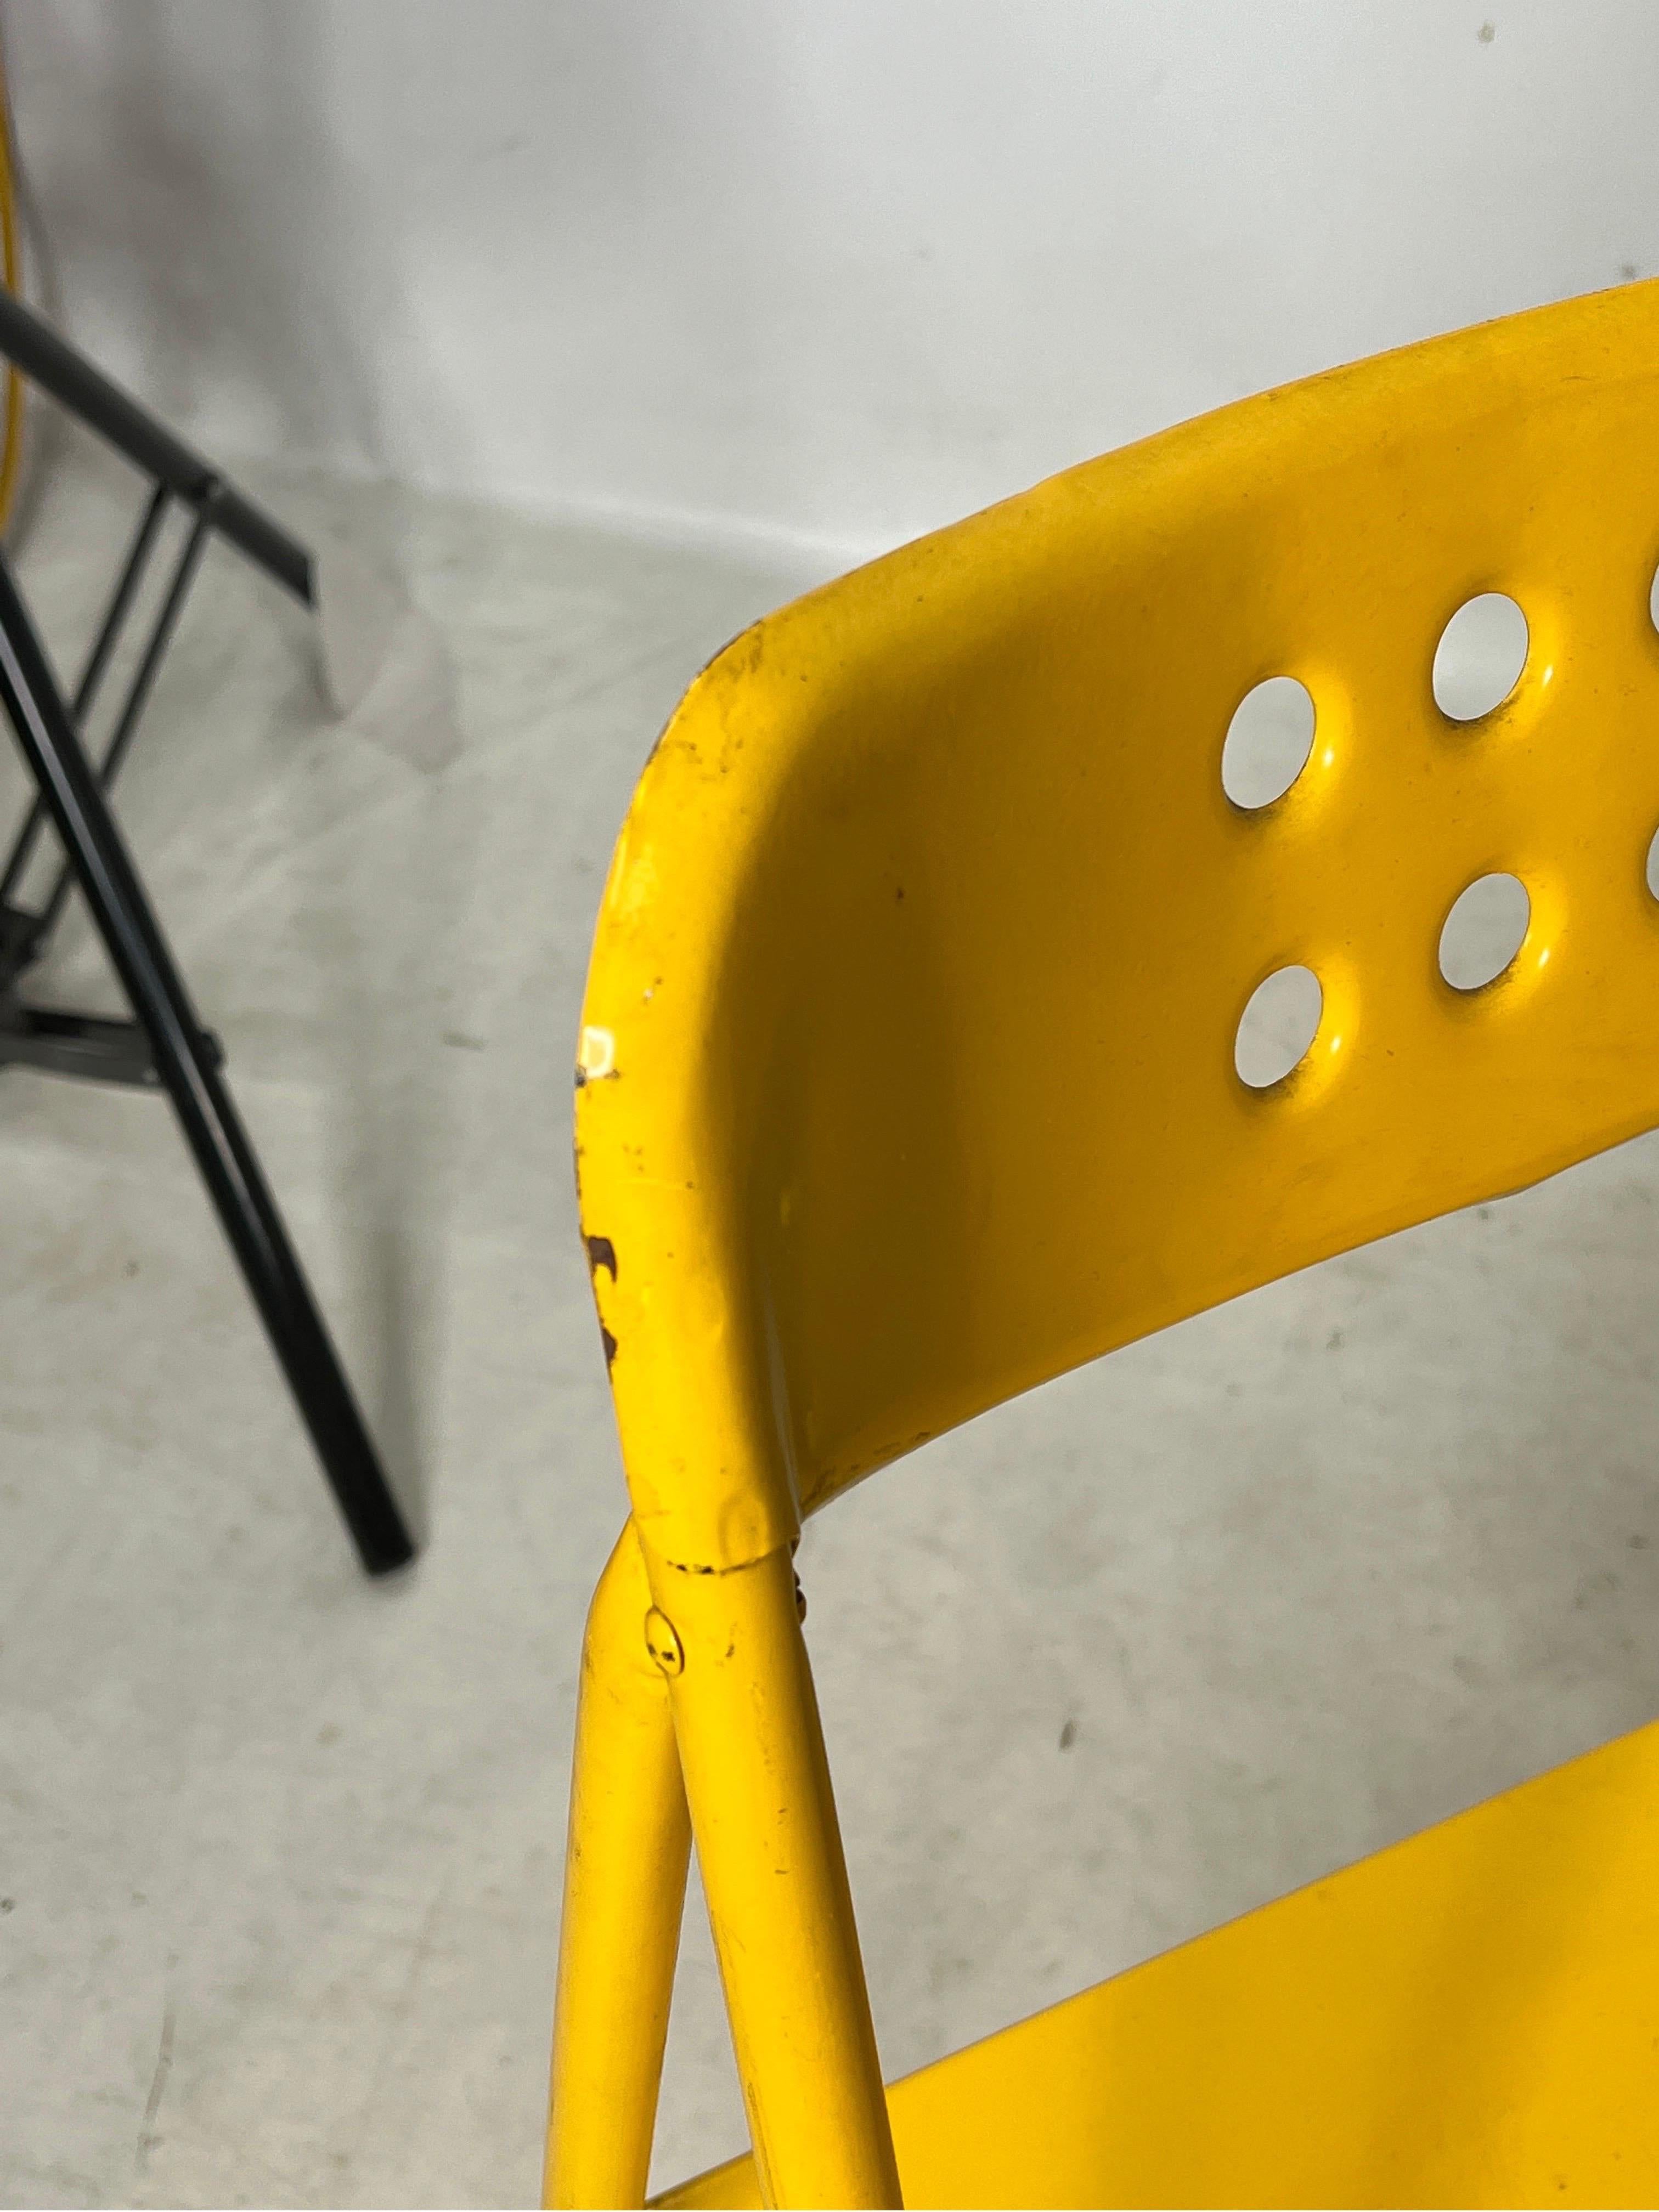 Mid-Century Modern Vintage Yellow Industrial Modern Folding Chairs - a Pair For Sale